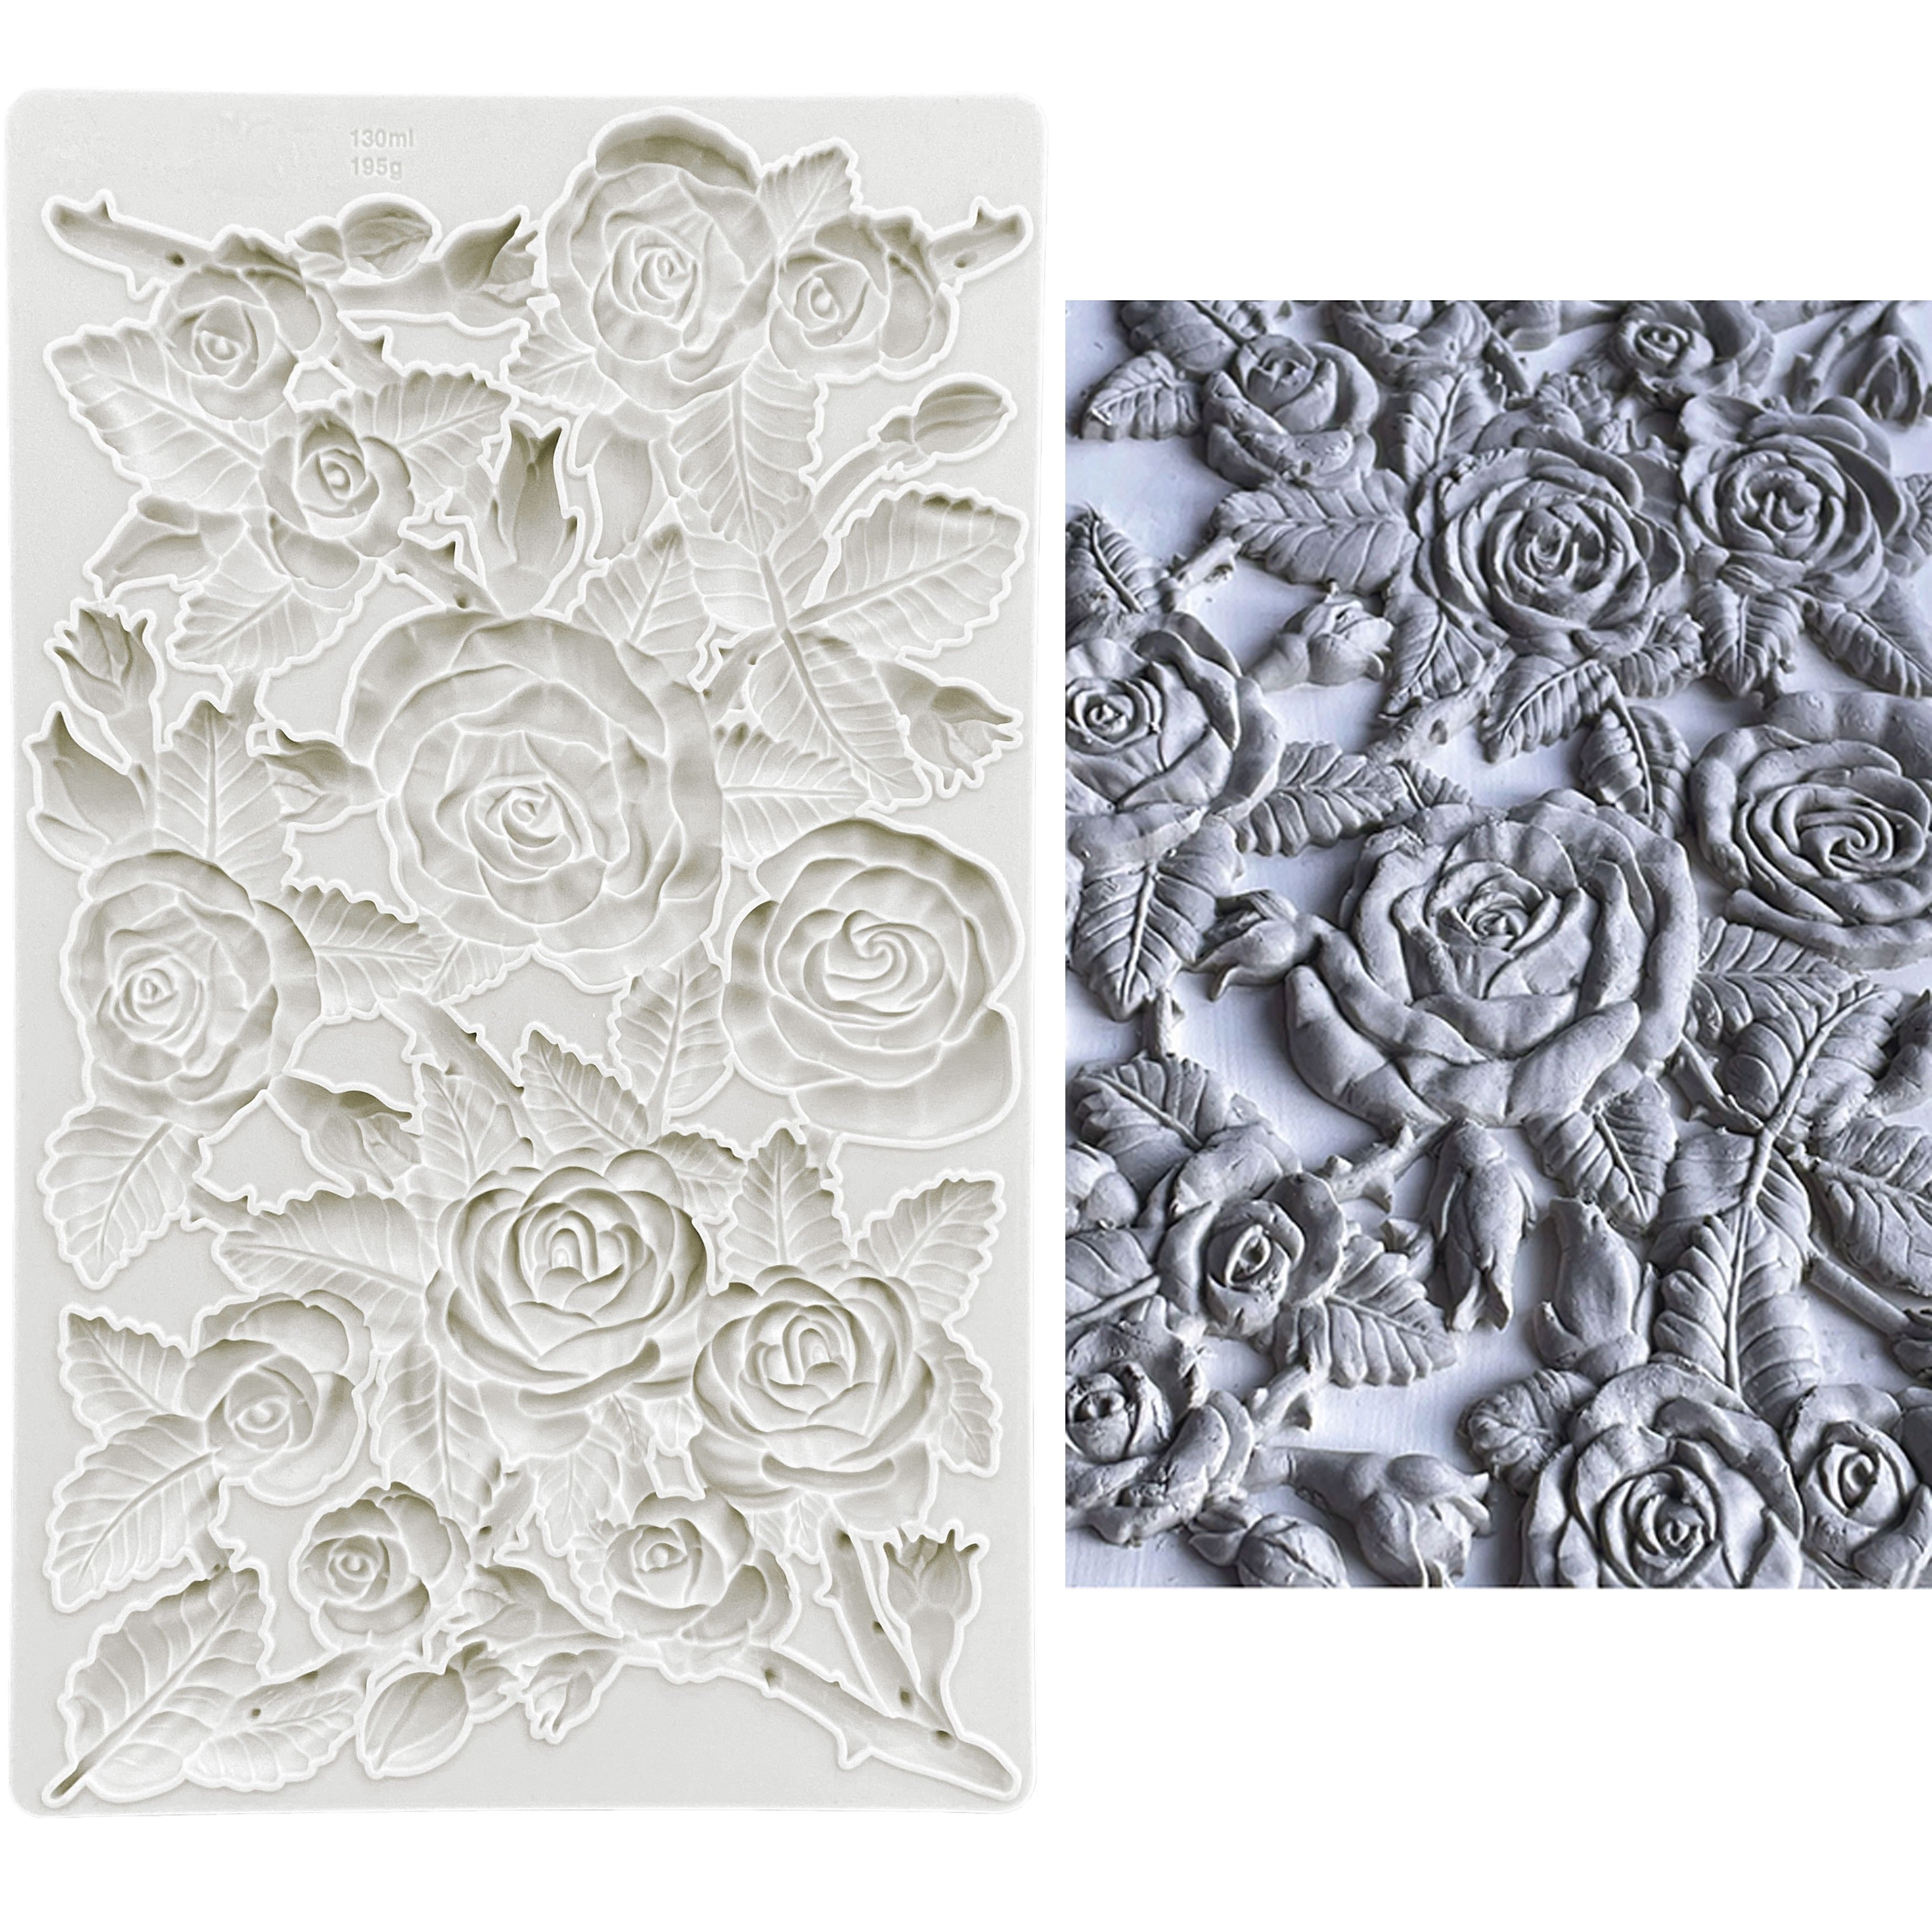 

Rose Flower Pattern Silicone Mold For Fondant, Gum Paste, Cake Decoration, Chocolate, Sugarcraft, Kitchen Gadget - Bpa Free Silicone Material